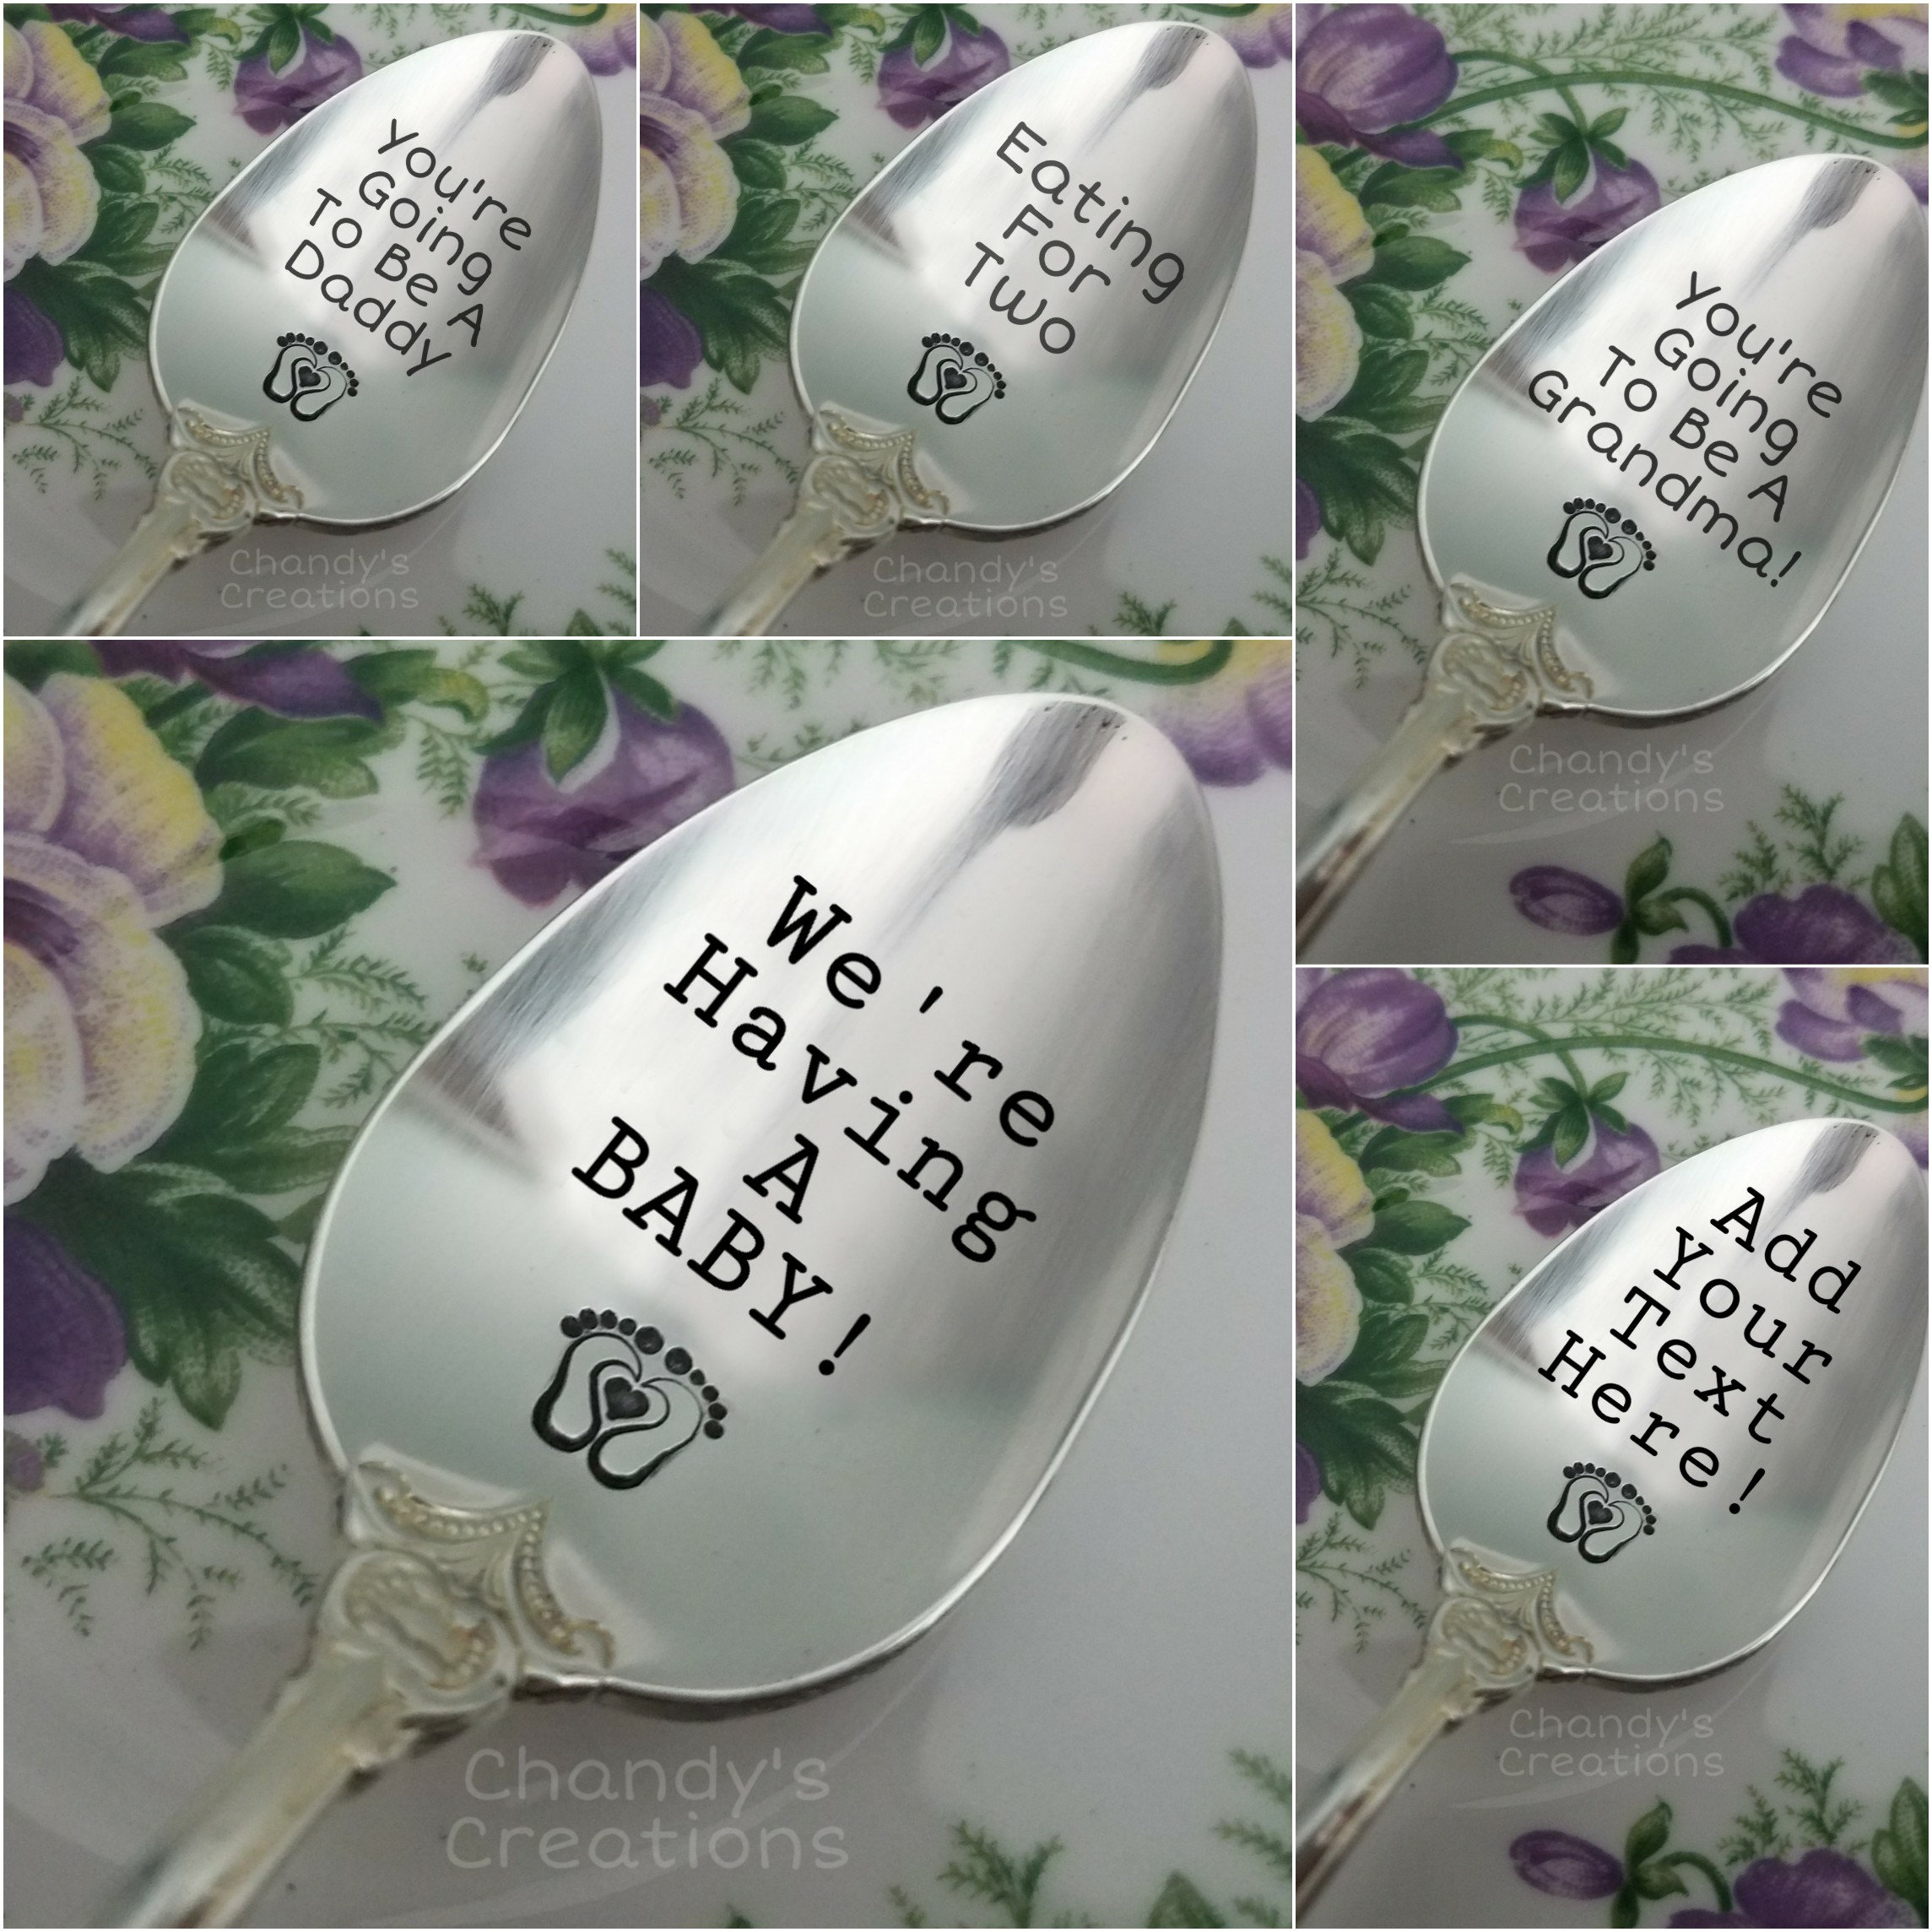 New Baking Buddy Cooking Partner Partner in Crime Hand Stamped Spoon  Personalized Pregnancy Announcement and Pregnancy Reveal Spoons 